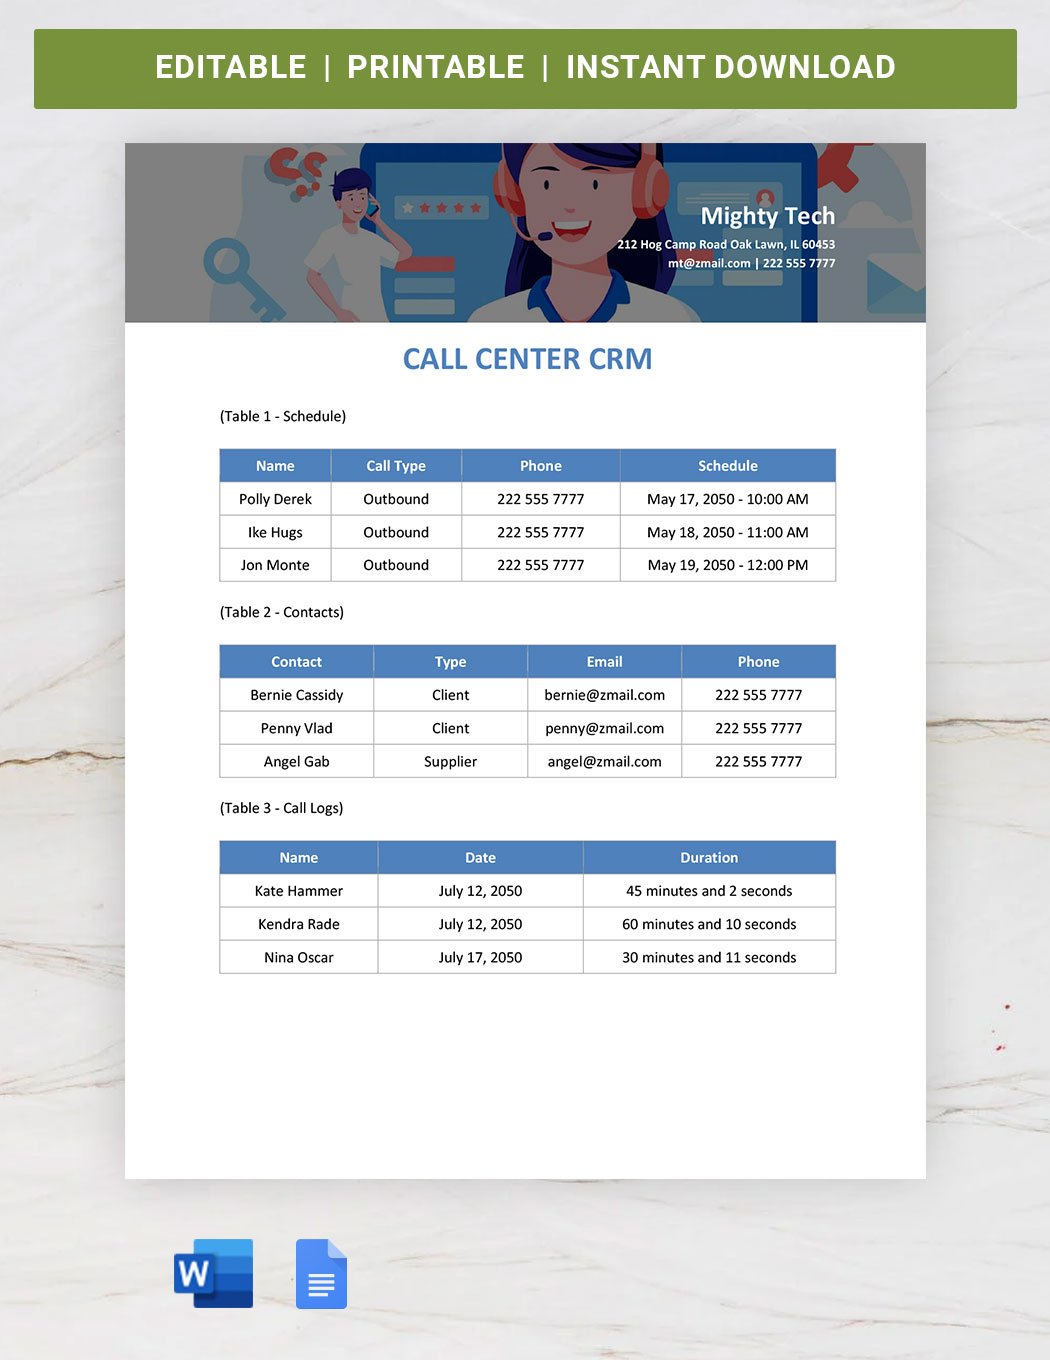 Call Center CRM Template in Word, Google Docs